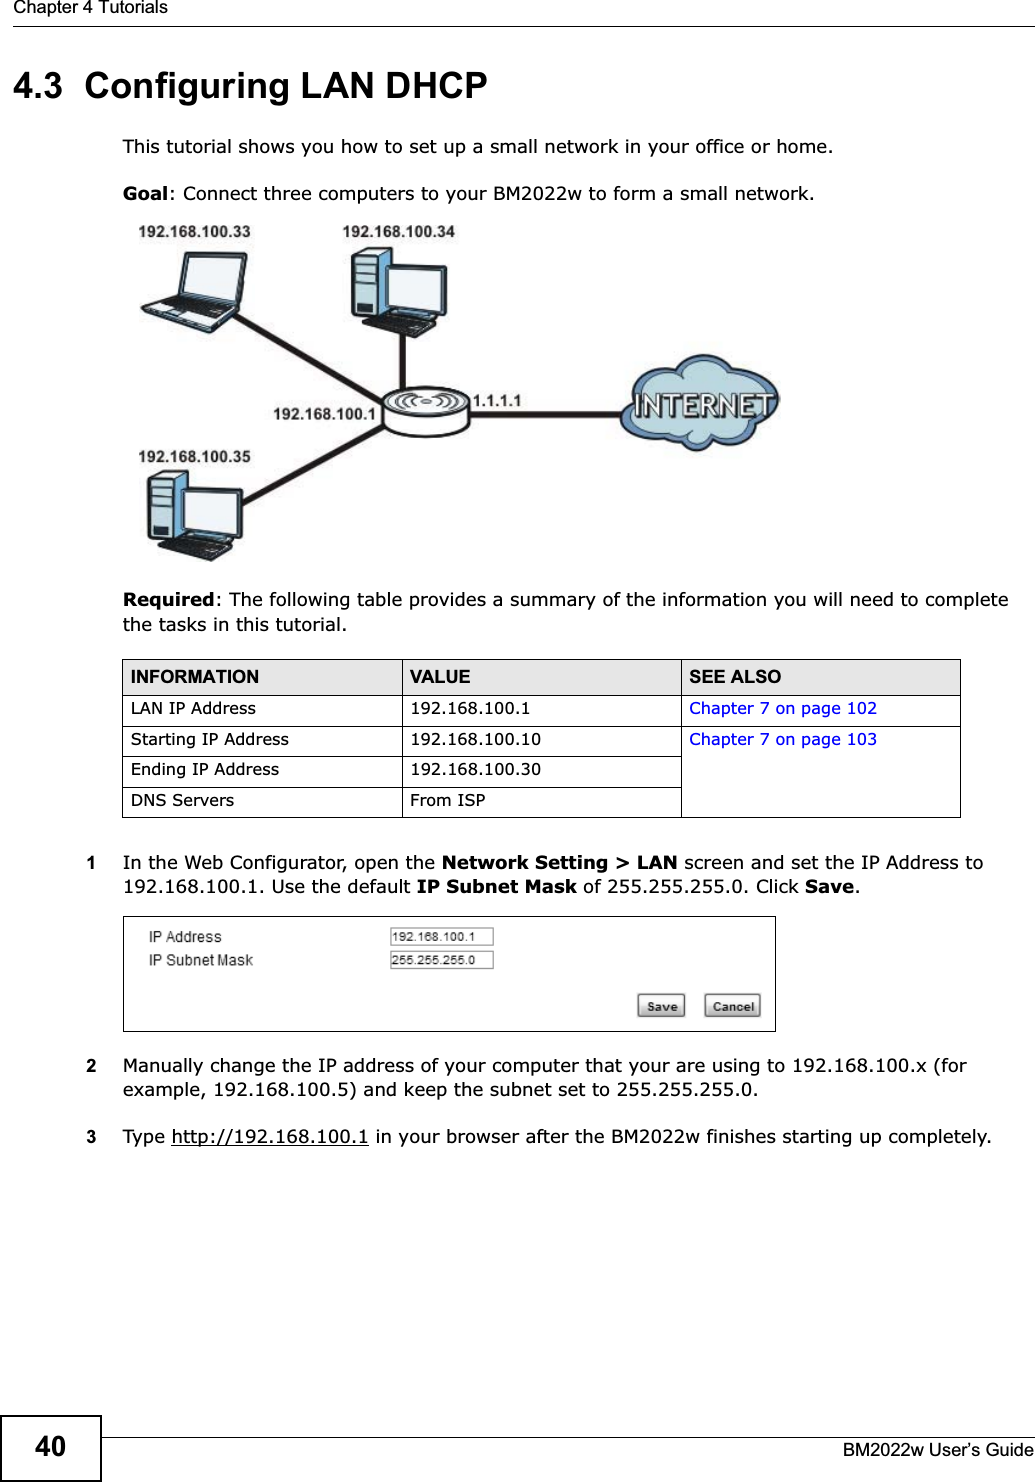 Chapter 4 TutorialsBM2022w User’s Guide404.3  Configuring LAN DHCPThis tutorial shows you how to set up a small network in your office or home.Goal: Connect three computers to your BM2022w to form a small network. Required: The following table provides a summary of the information you will need to complete the tasks in this tutorial. 1In the Web Configurator, open the Network Setting &gt; LAN screen and set the IP Address to 192.168.100.1. Use the default IP Subnet Mask of 255.255.255.0. Click Save.2Manually change the IP address of your computer that your are using to 192.168.100.x (for example, 192.168.100.5) and keep the subnet set to 255.255.255.0.3Type http://192.168.100.1 in your browser after the BM2022w finishes starting up completely.INFORMATION VALUE SEE ALSOLAN IP Address 192.168.100.1 Chapter 7 on page 102Starting IP Address 192.168.100.10 Chapter 7 on page 103Ending IP Address 192.168.100.30DNS Servers From ISP